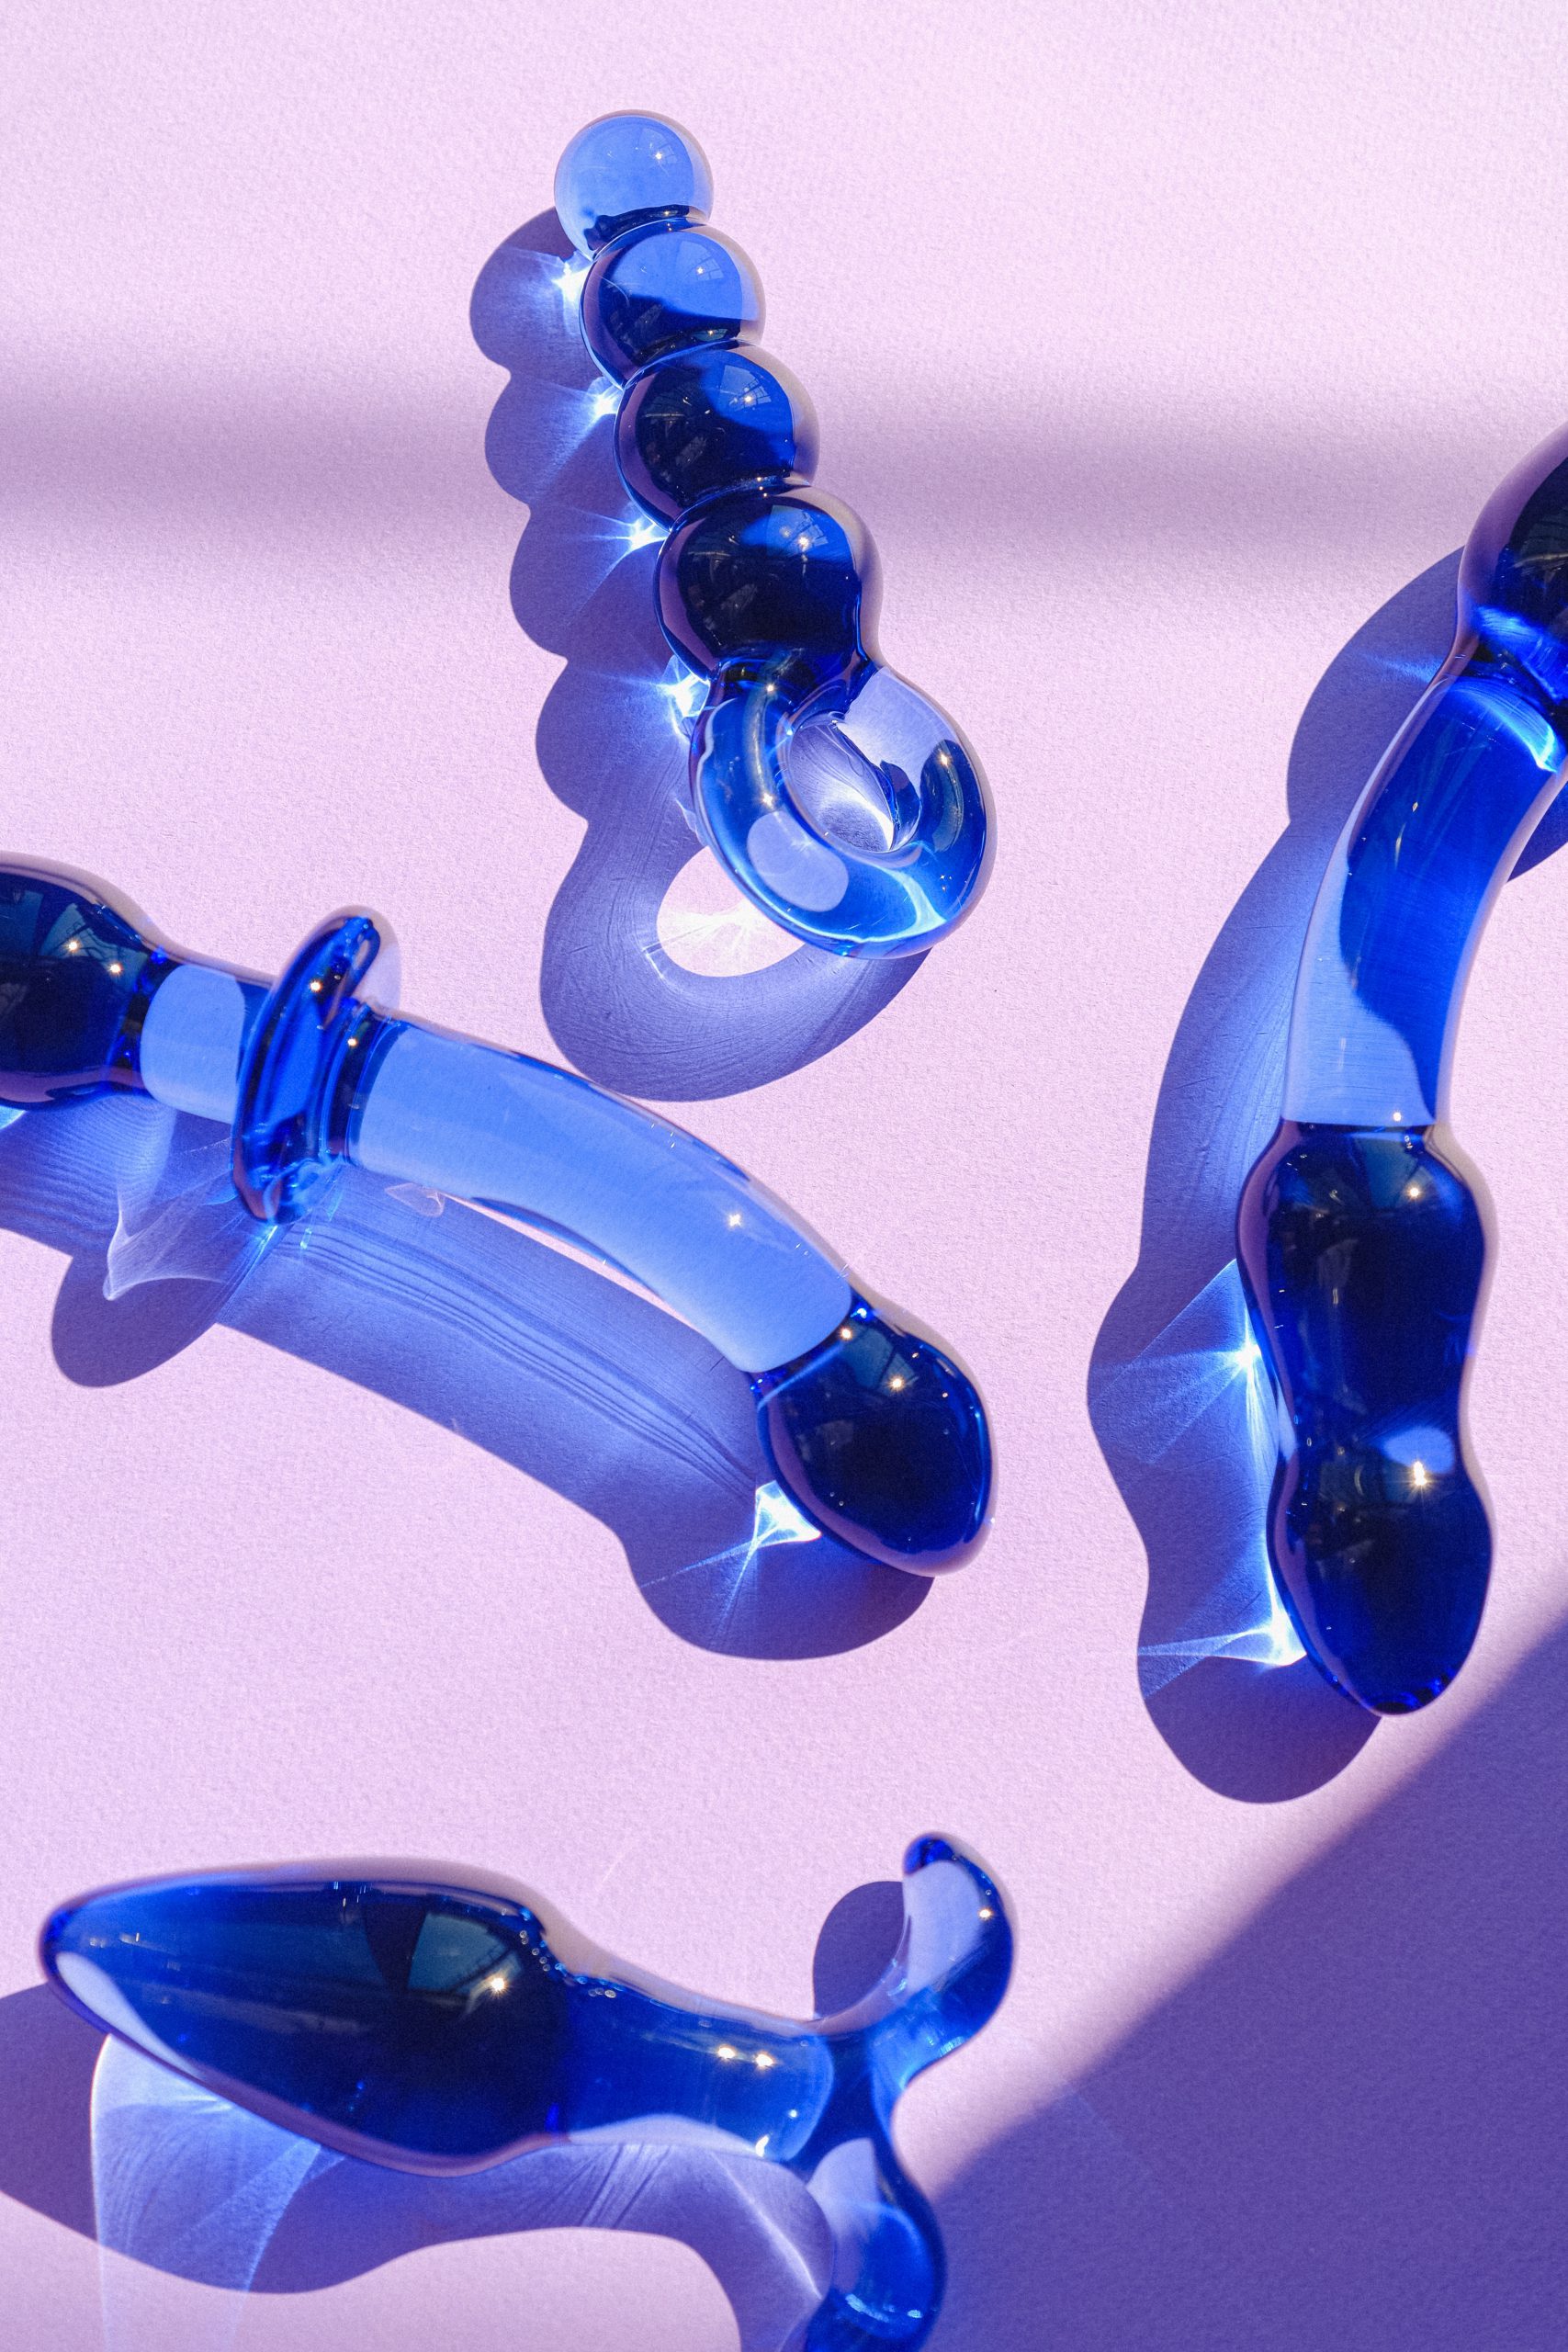 How to Clean Sex Toys: A Complete Guide for Safe and Healthy Use